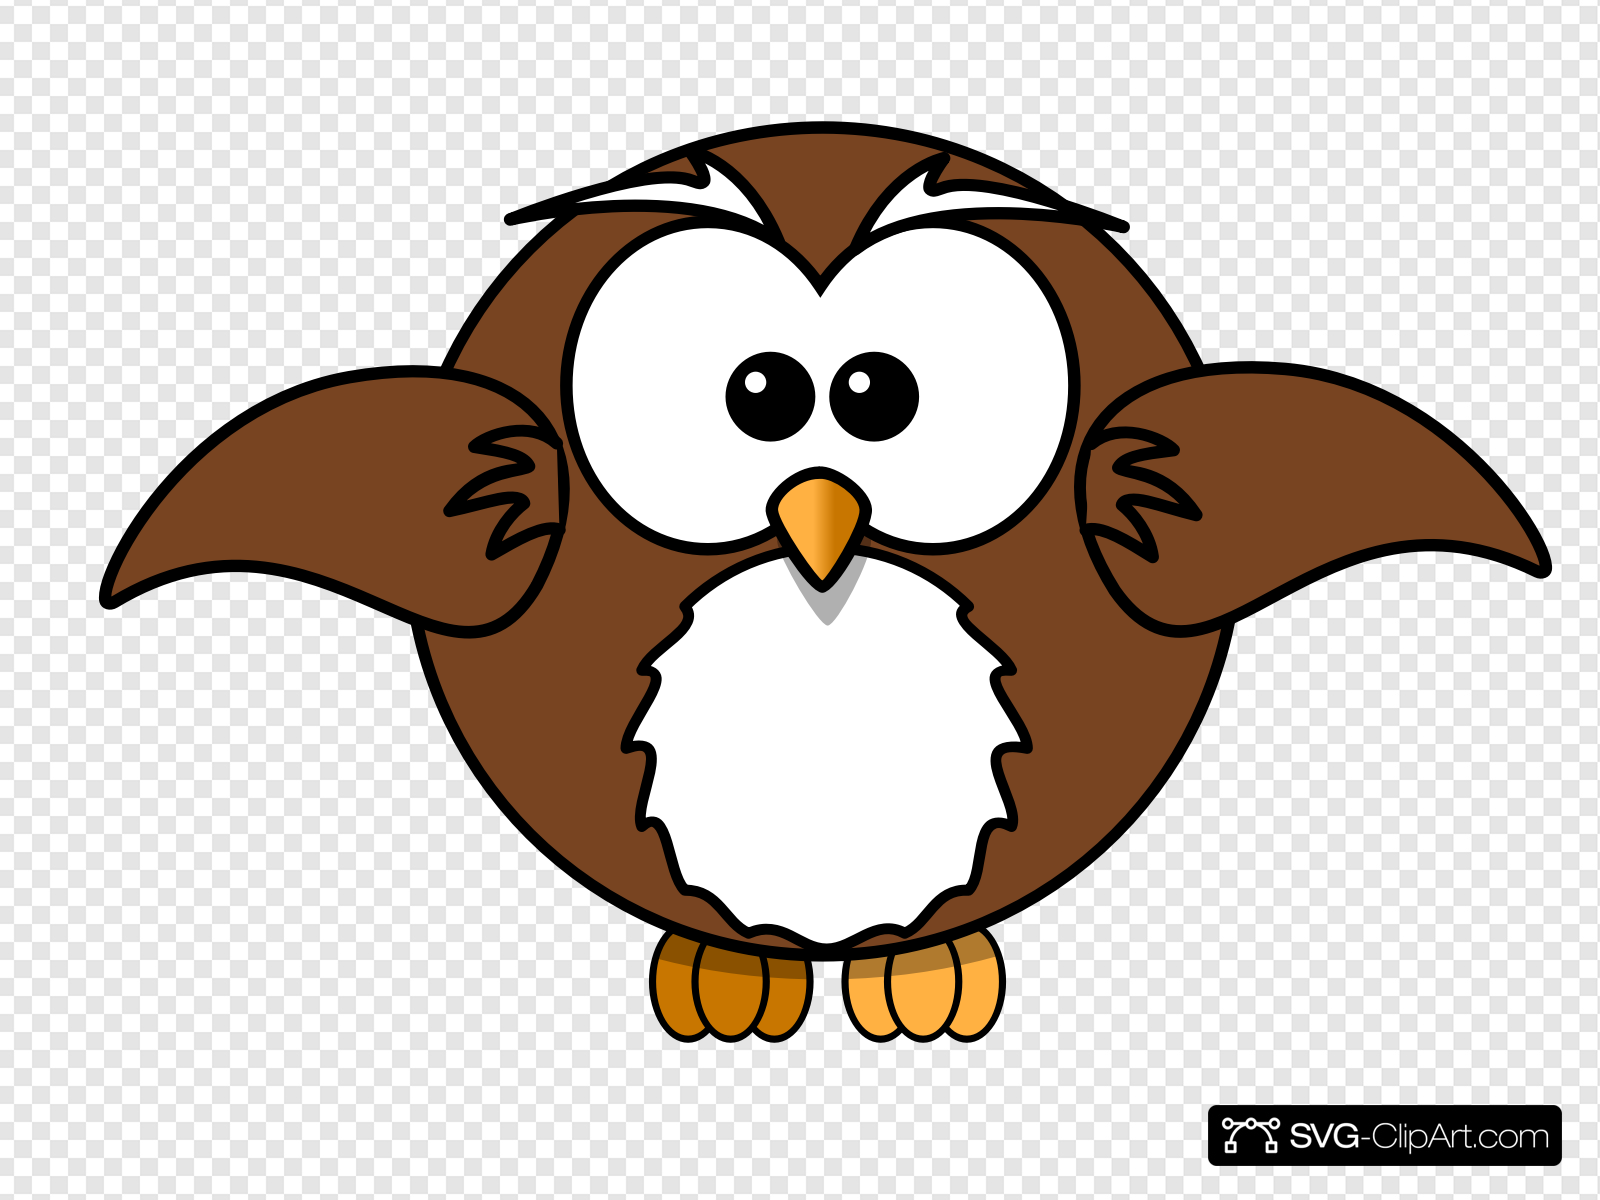 owl clipart brown